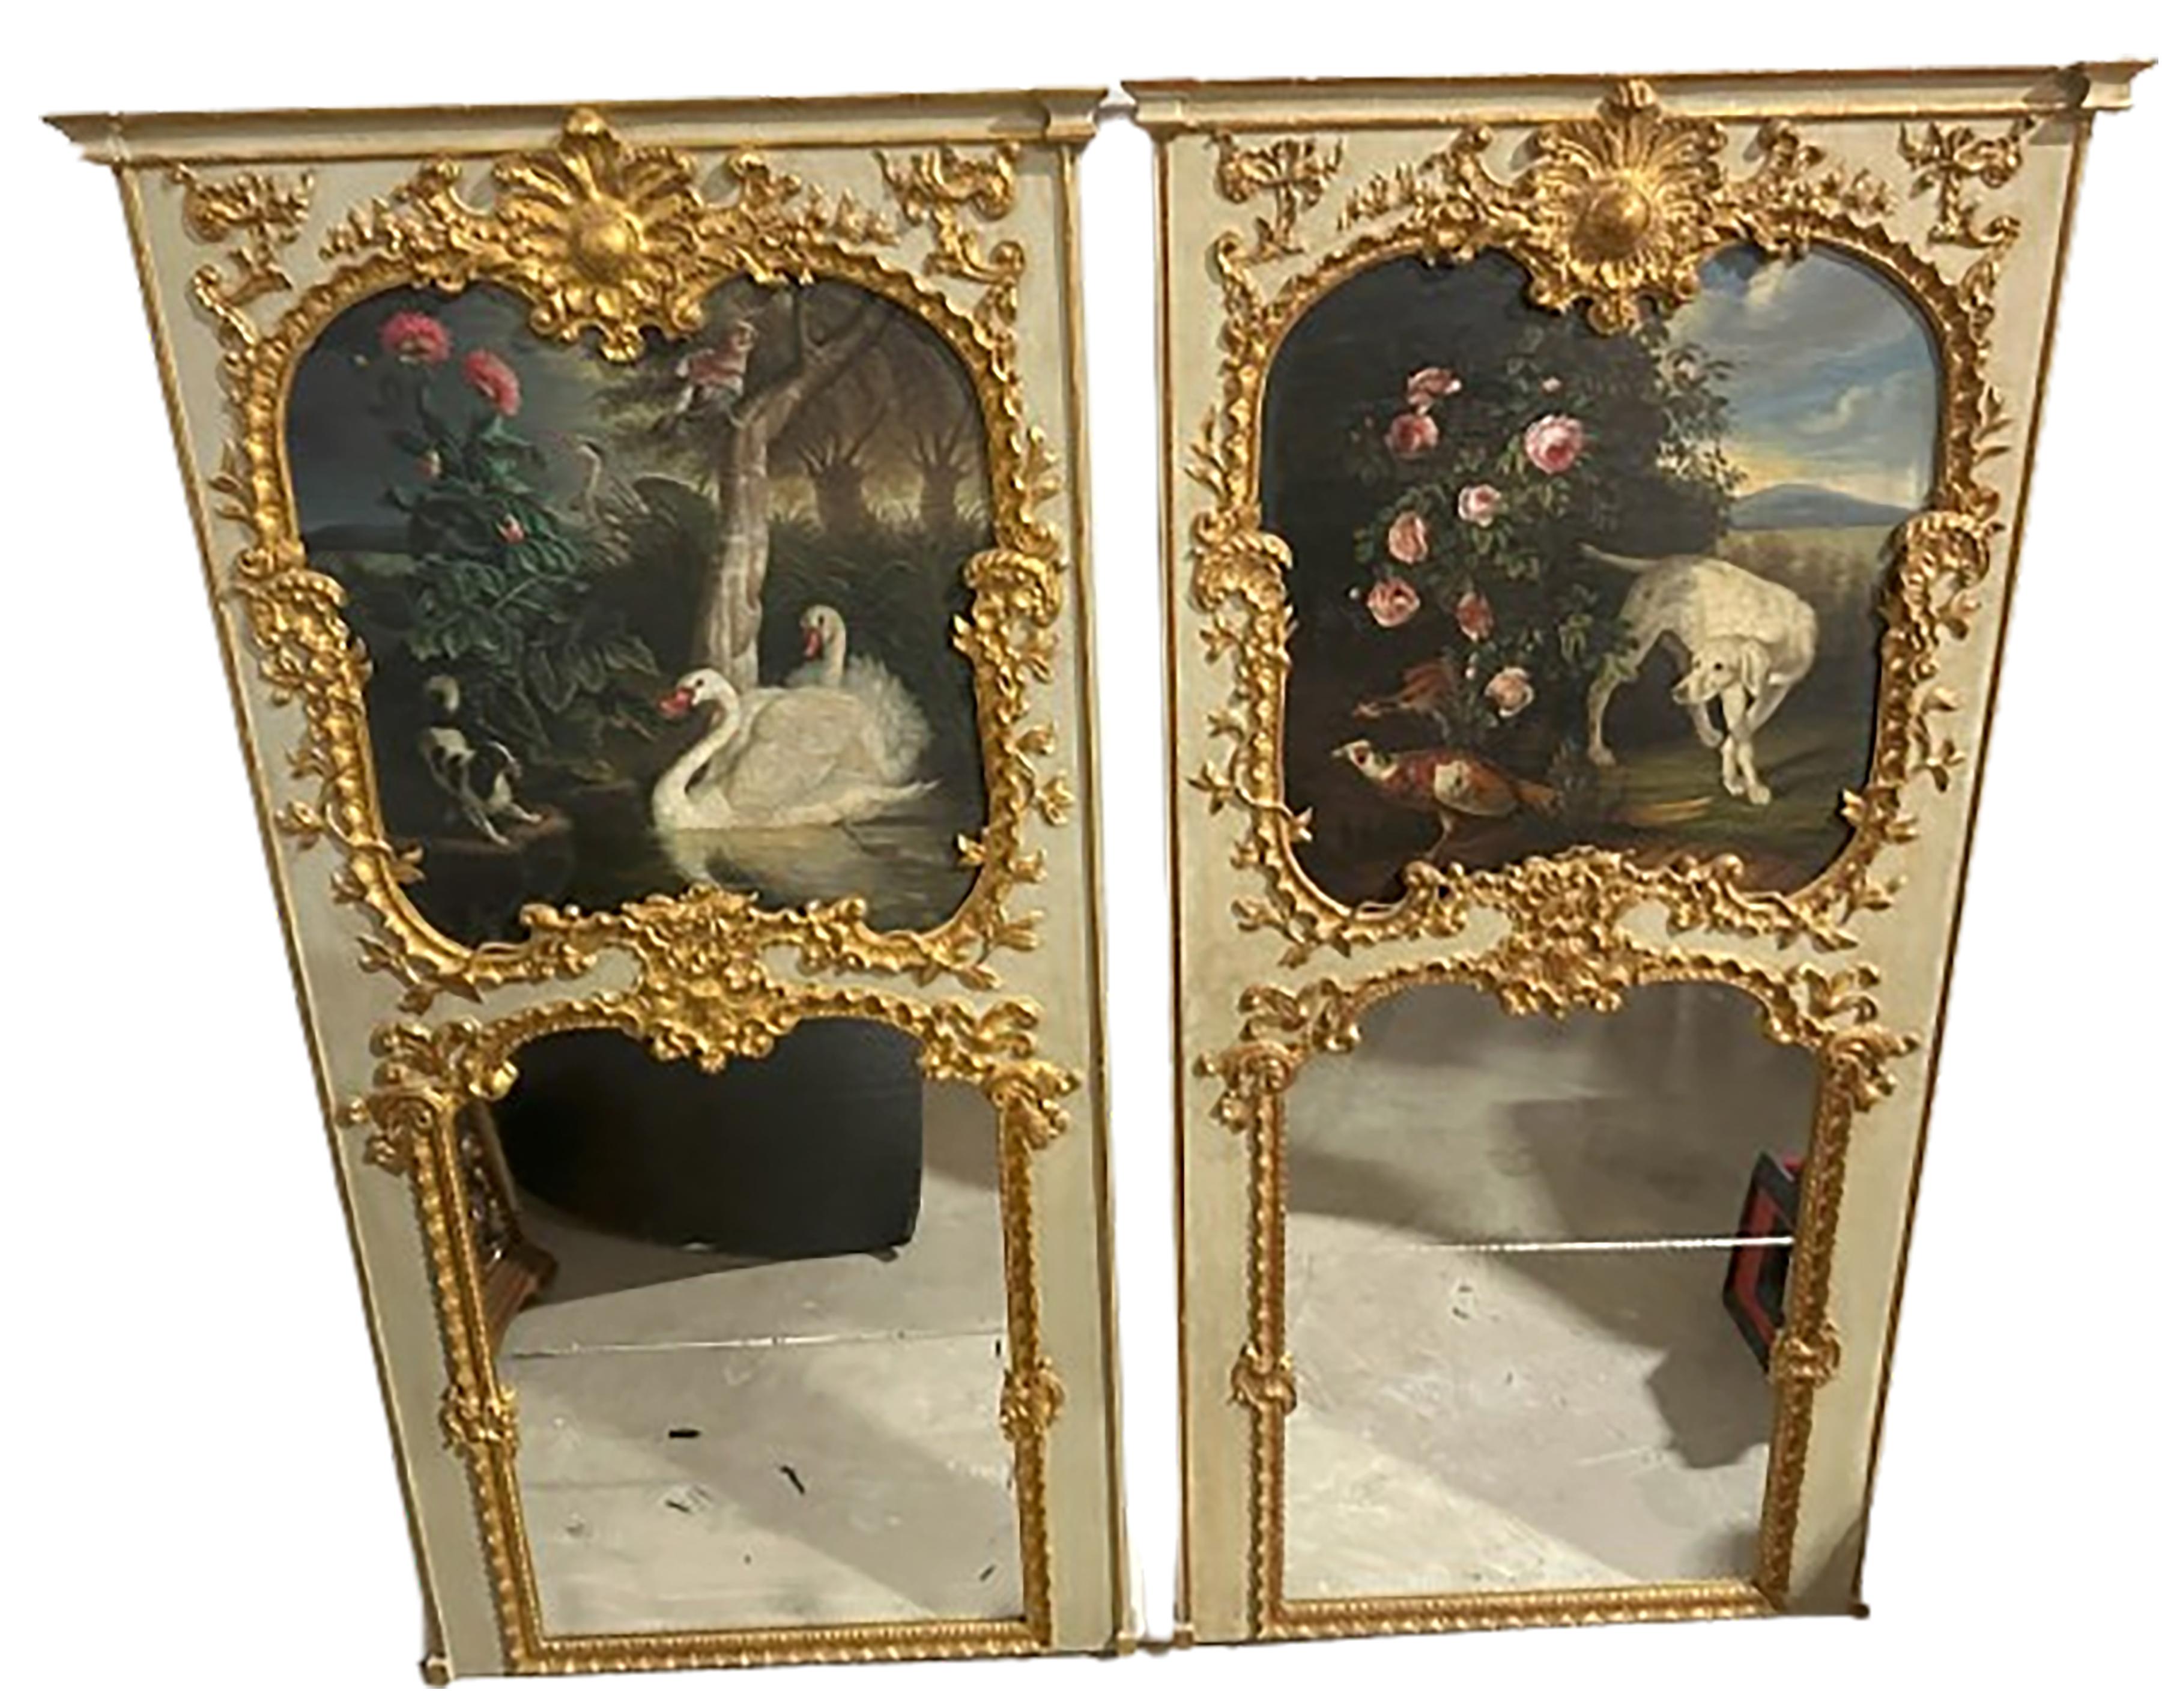 An exquisite pair of trumeau mirrors. Mirrored glass on the bottom halves of each. Top halves include a hand painted diptych of a pastoral scene. This includes a dog on the right looking towards a pair of swans on the left-hand side. These painted